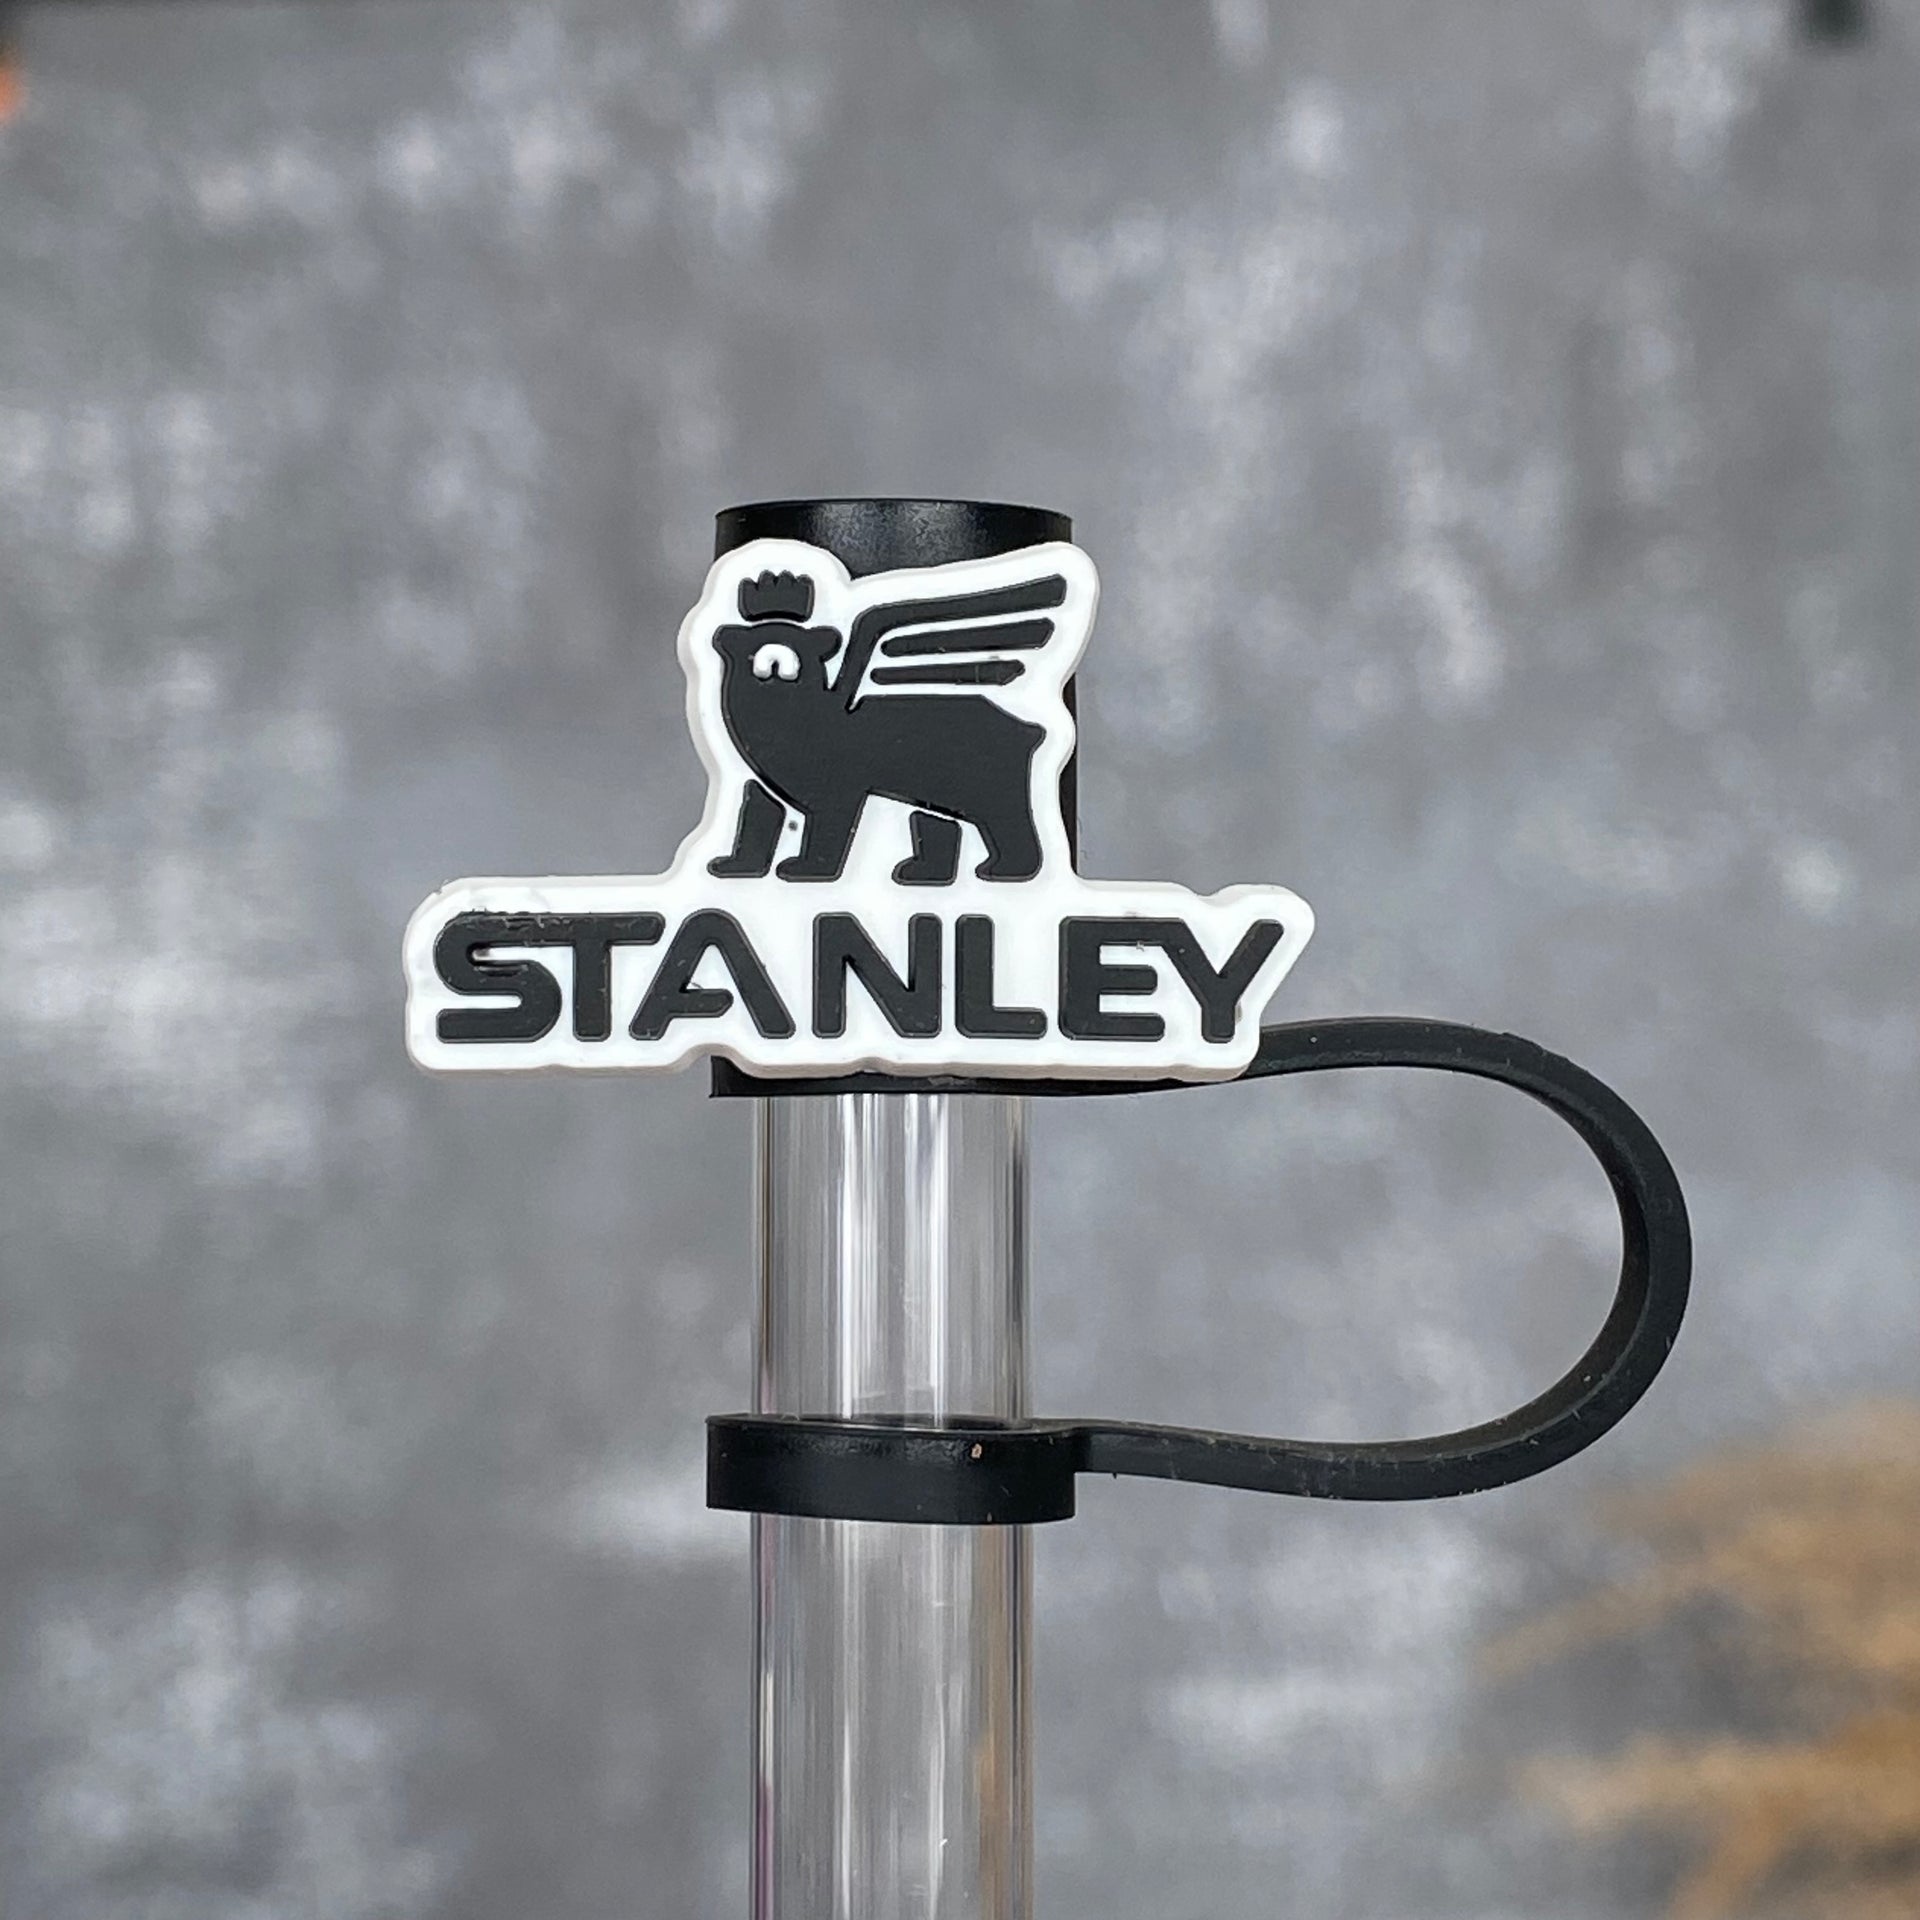 Stanley Straw Topper, Bow Straw Topper for Stanley, Bow Topper for